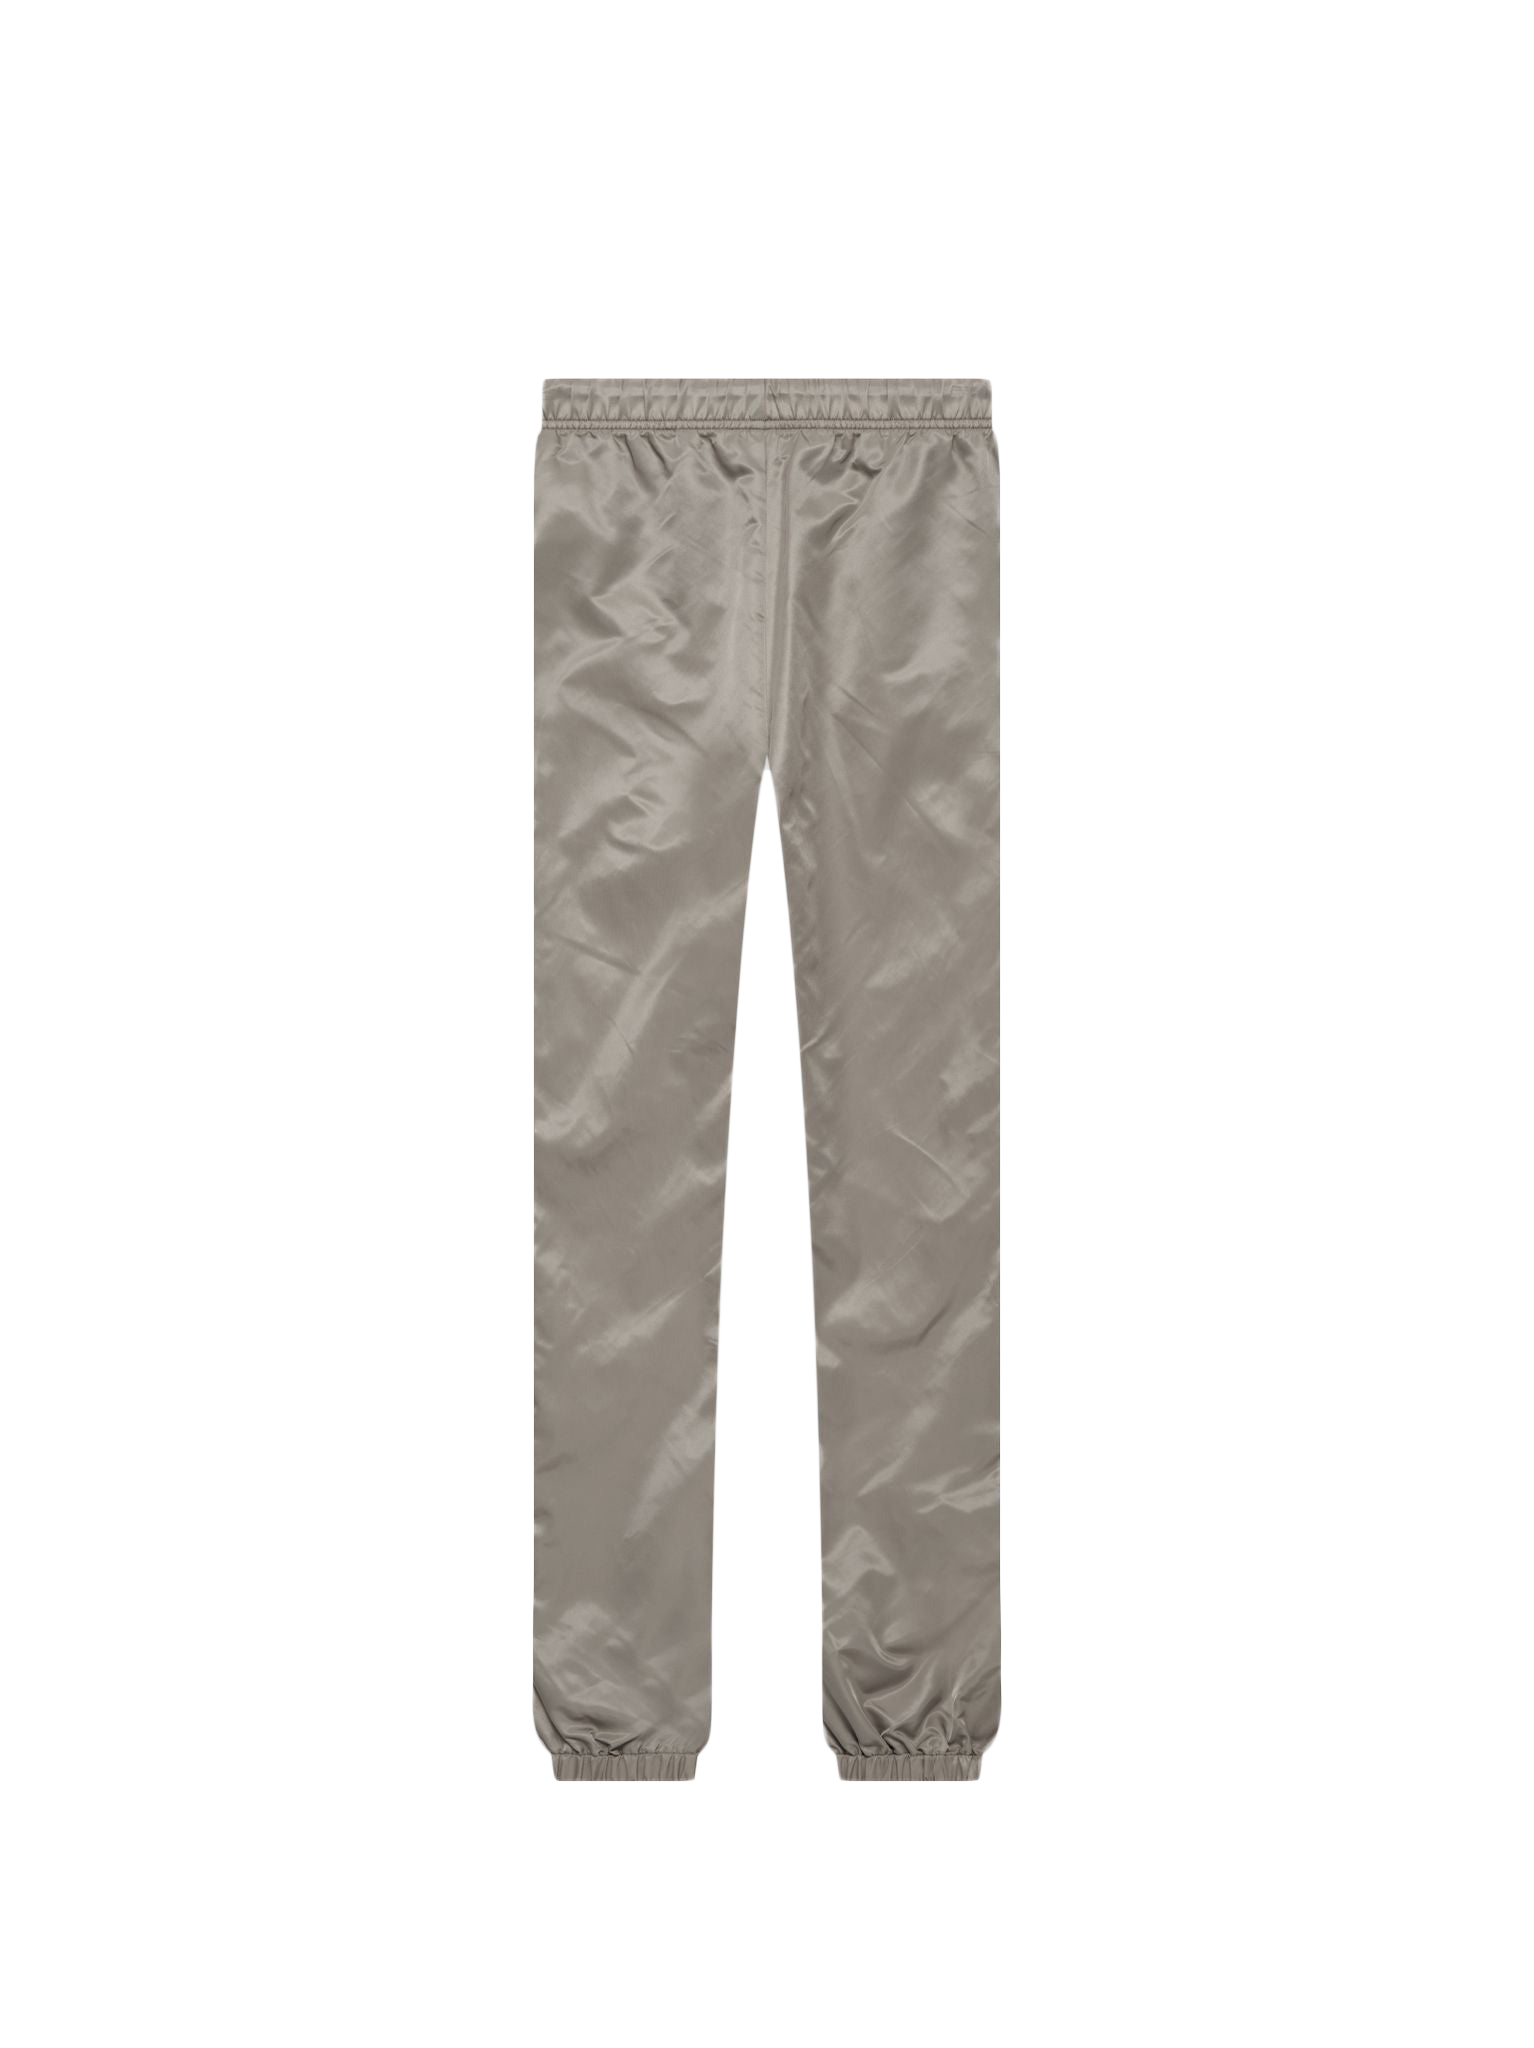 Fear of God Essentials Track Pant Desert Taupe Men's - SS22 - US